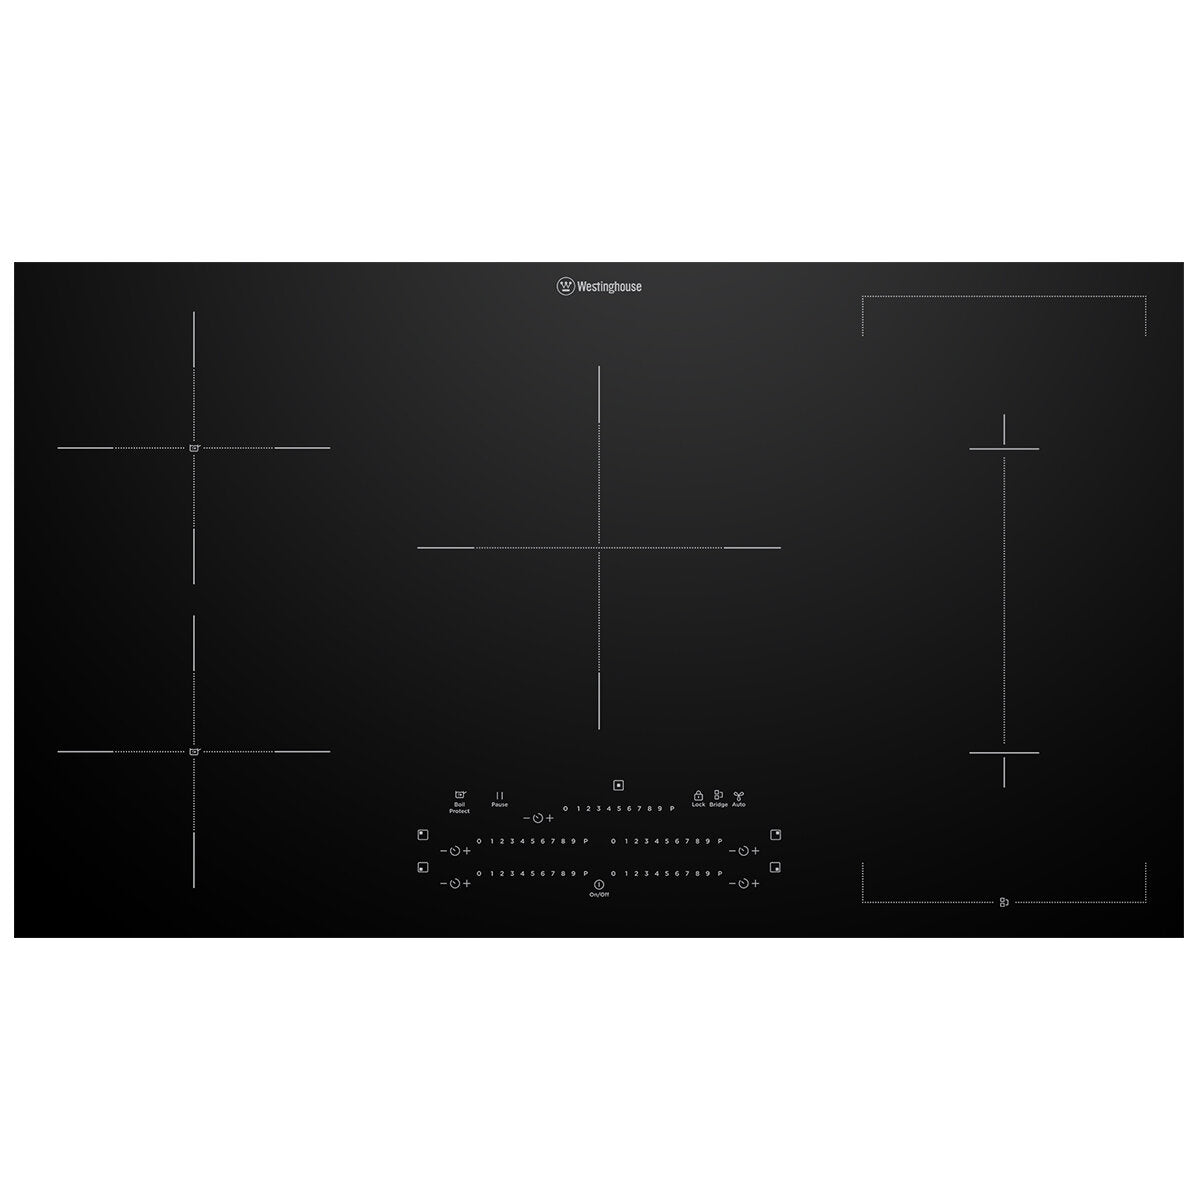 Westinghouse 90cm Five Zone Induction with Hob2Hood Cooktop Model WHI955BD